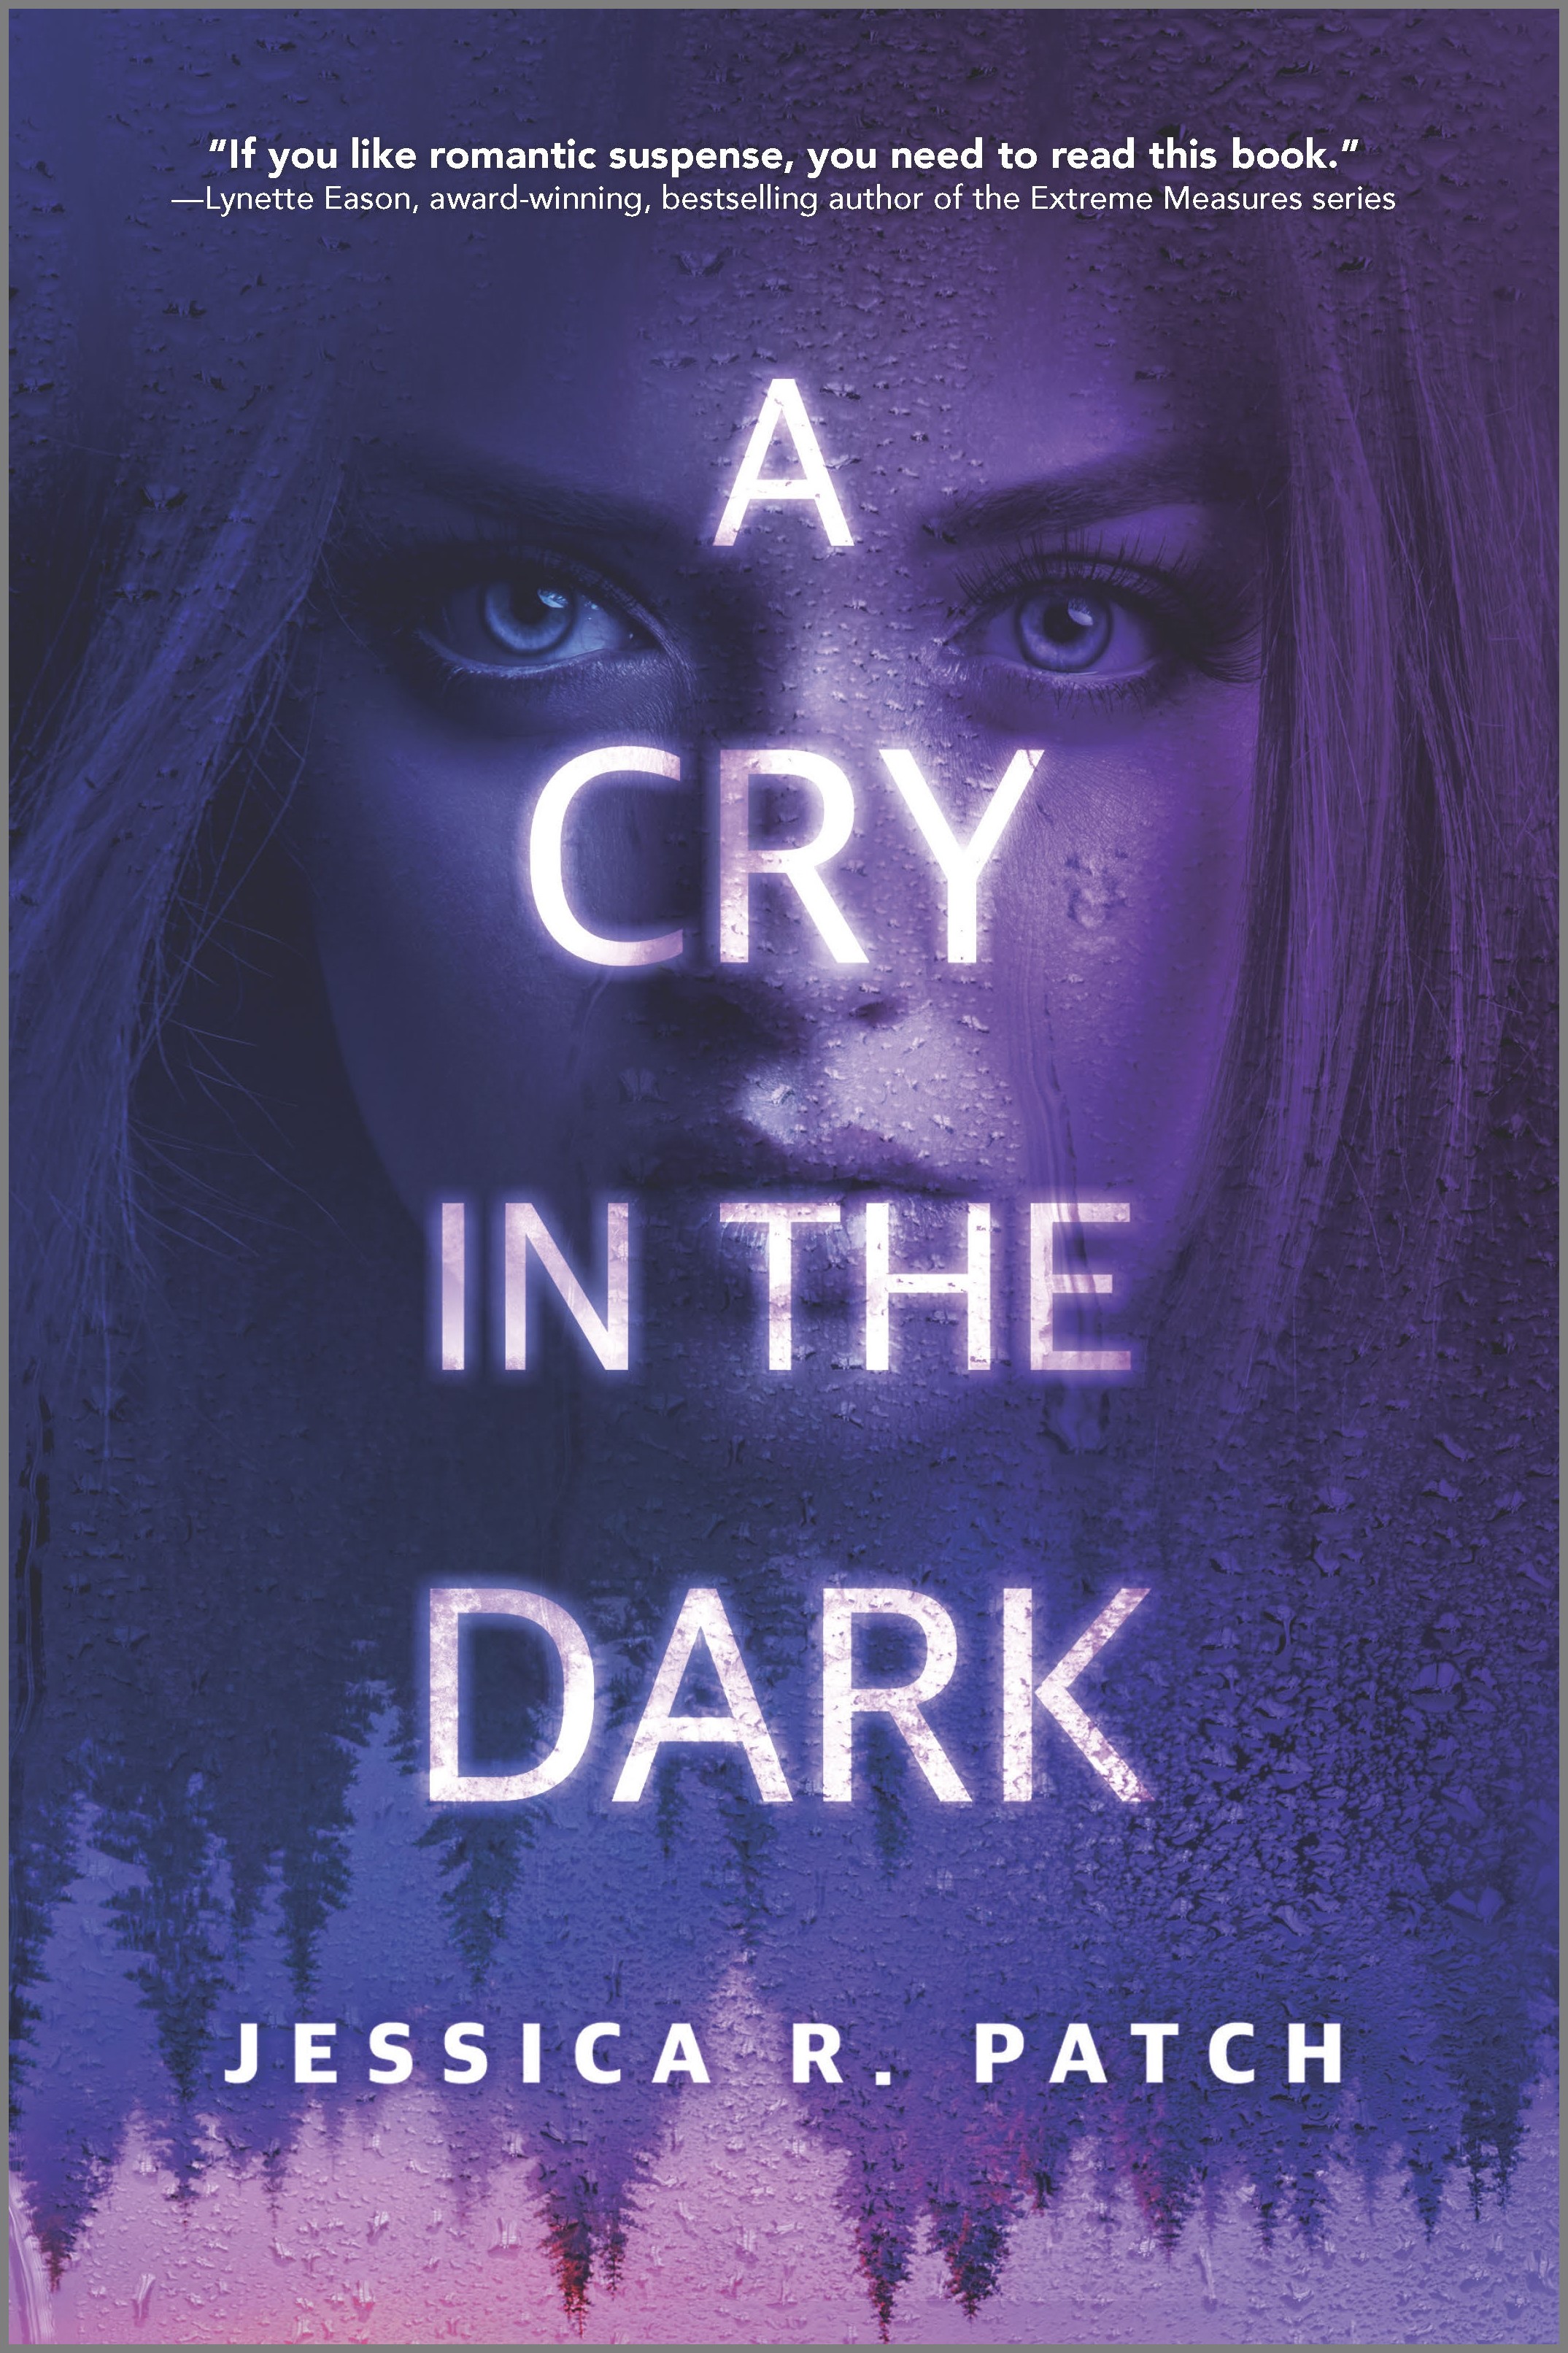 A CRY IN THE DARK by Jessica R. Patch